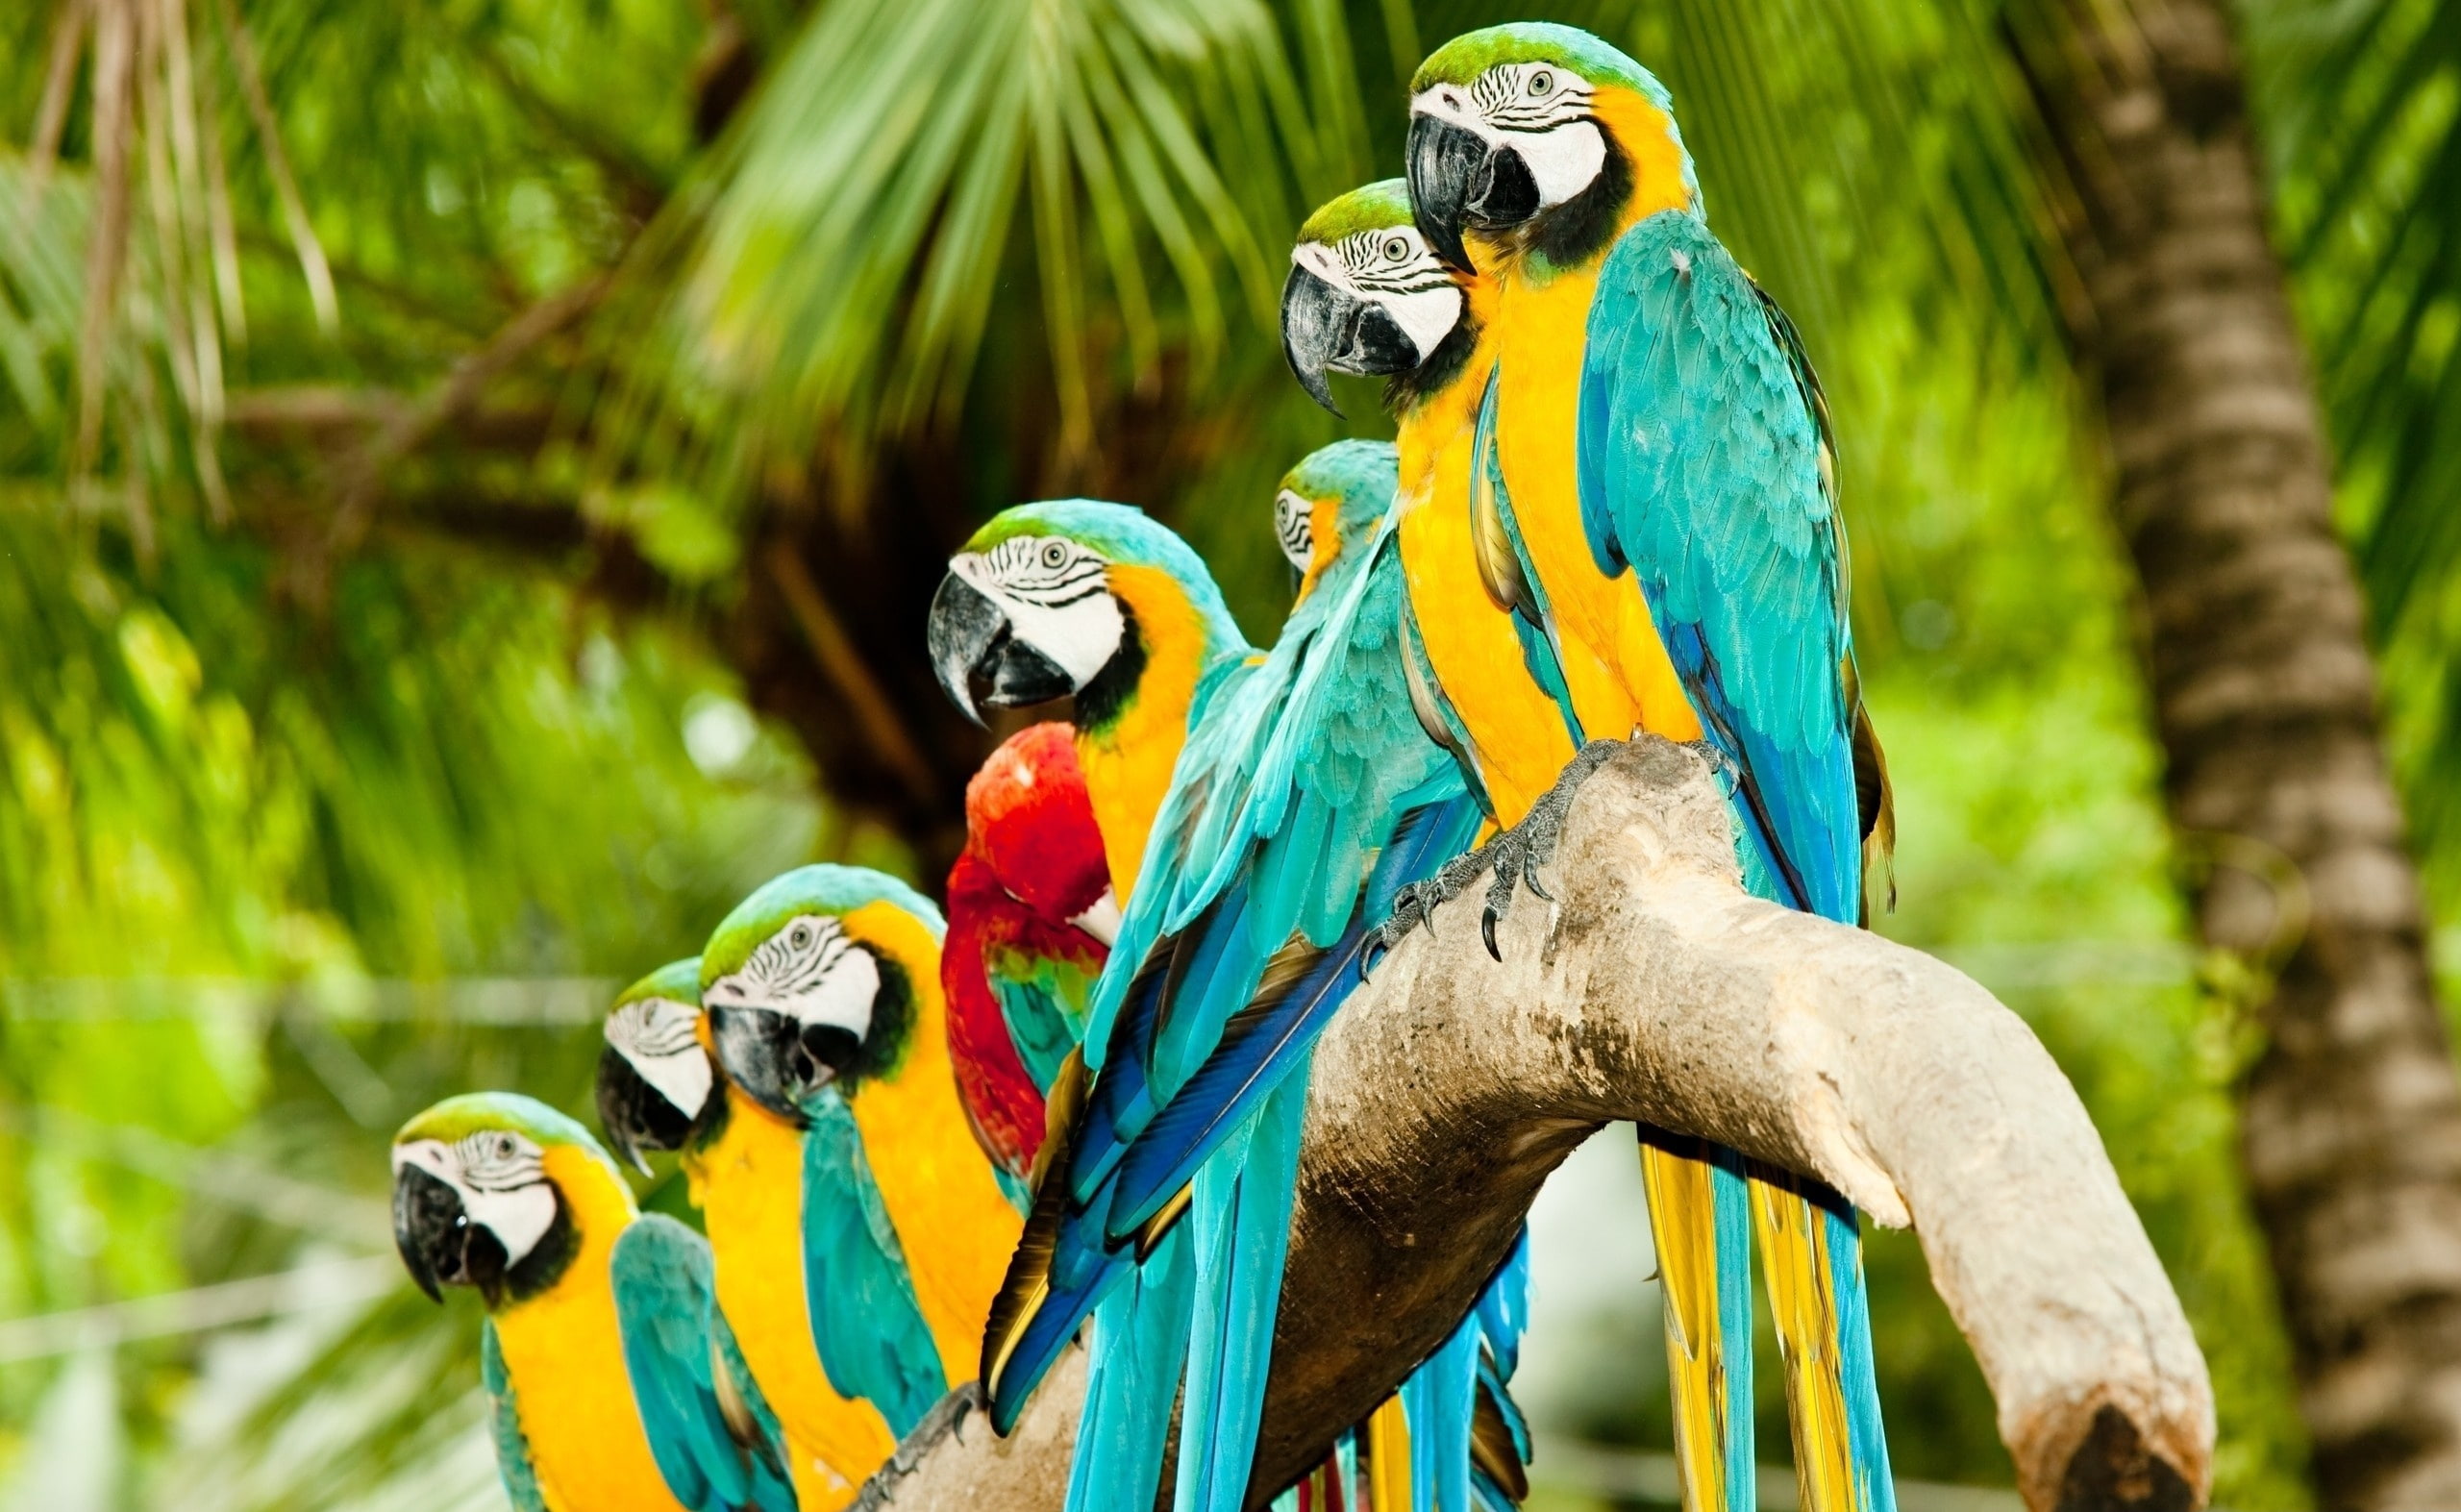 Blue And Gold Macaw Parrots, several yellow-and-blue macaws, Animals